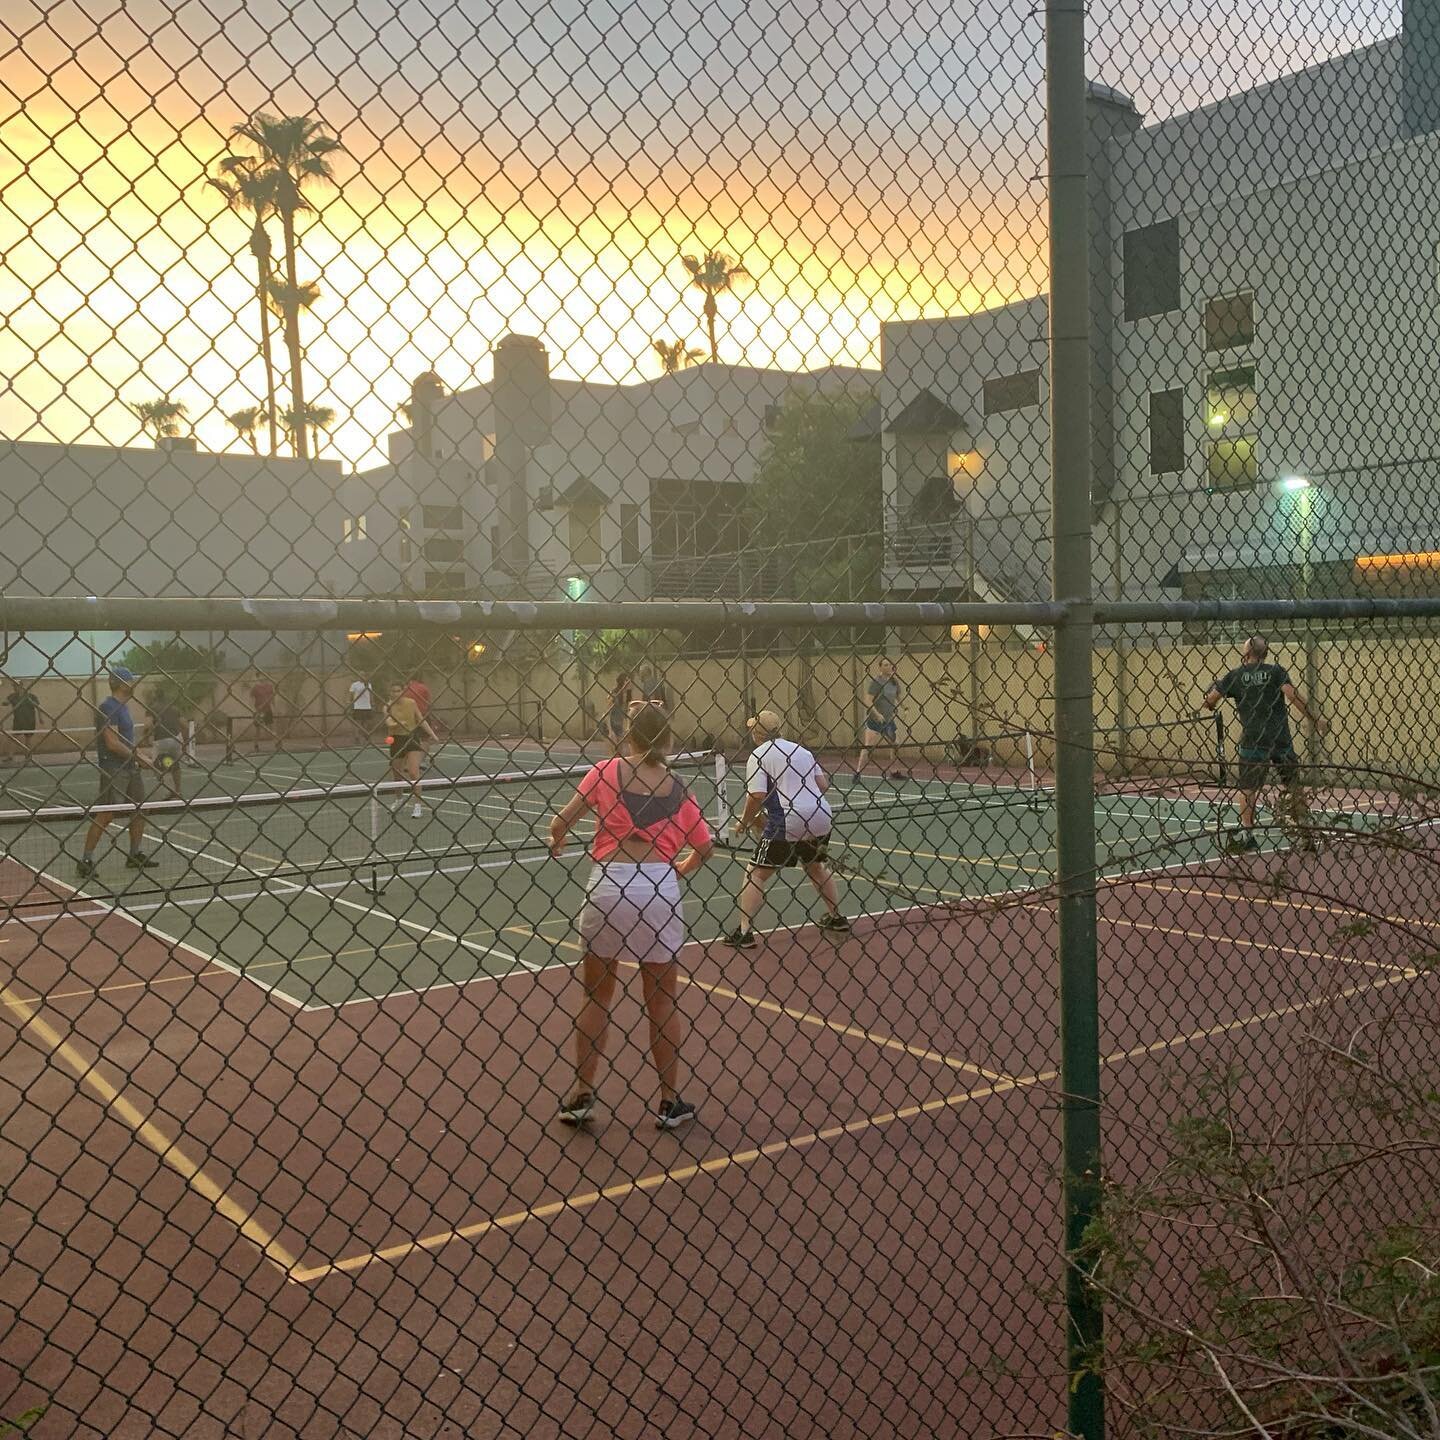 We don&rsquo;t let an Excessive Heat warning get in the way of our #pickleball fun! We&rsquo;re Arizonans! 😎🌵☀️
.
#phxpickleball #lgbtpickleball #excessiveheat #allwelcome